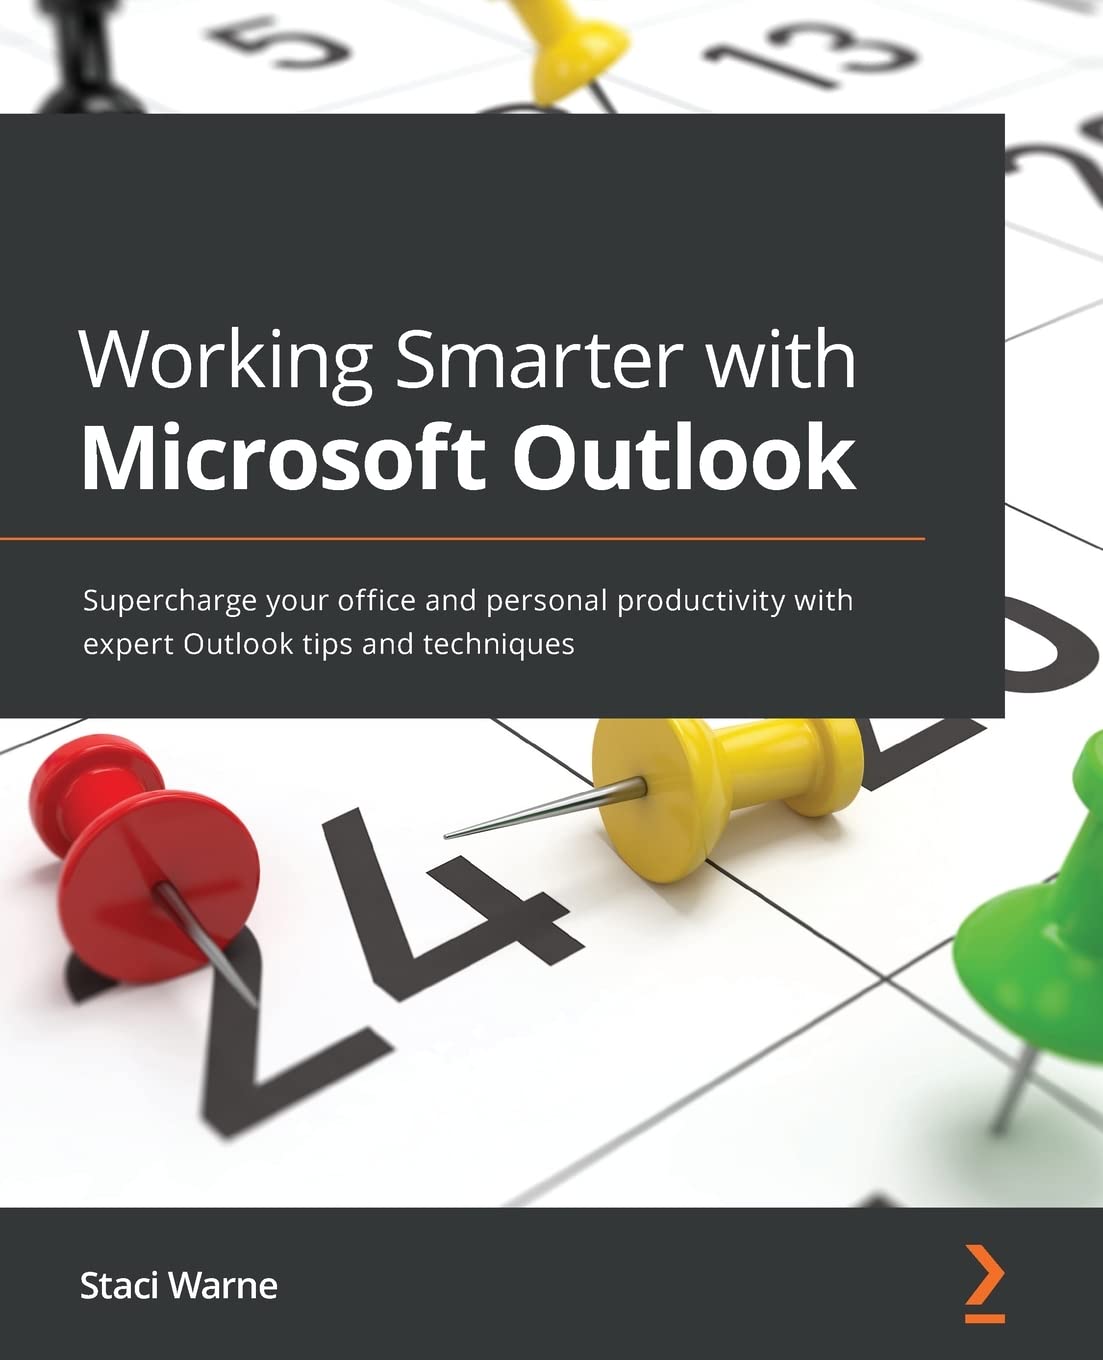 Working Smarter with Microsoft Outlook: Supercharge your office and personal productivity with expert Outlook tips and techniques by  Staci Warne